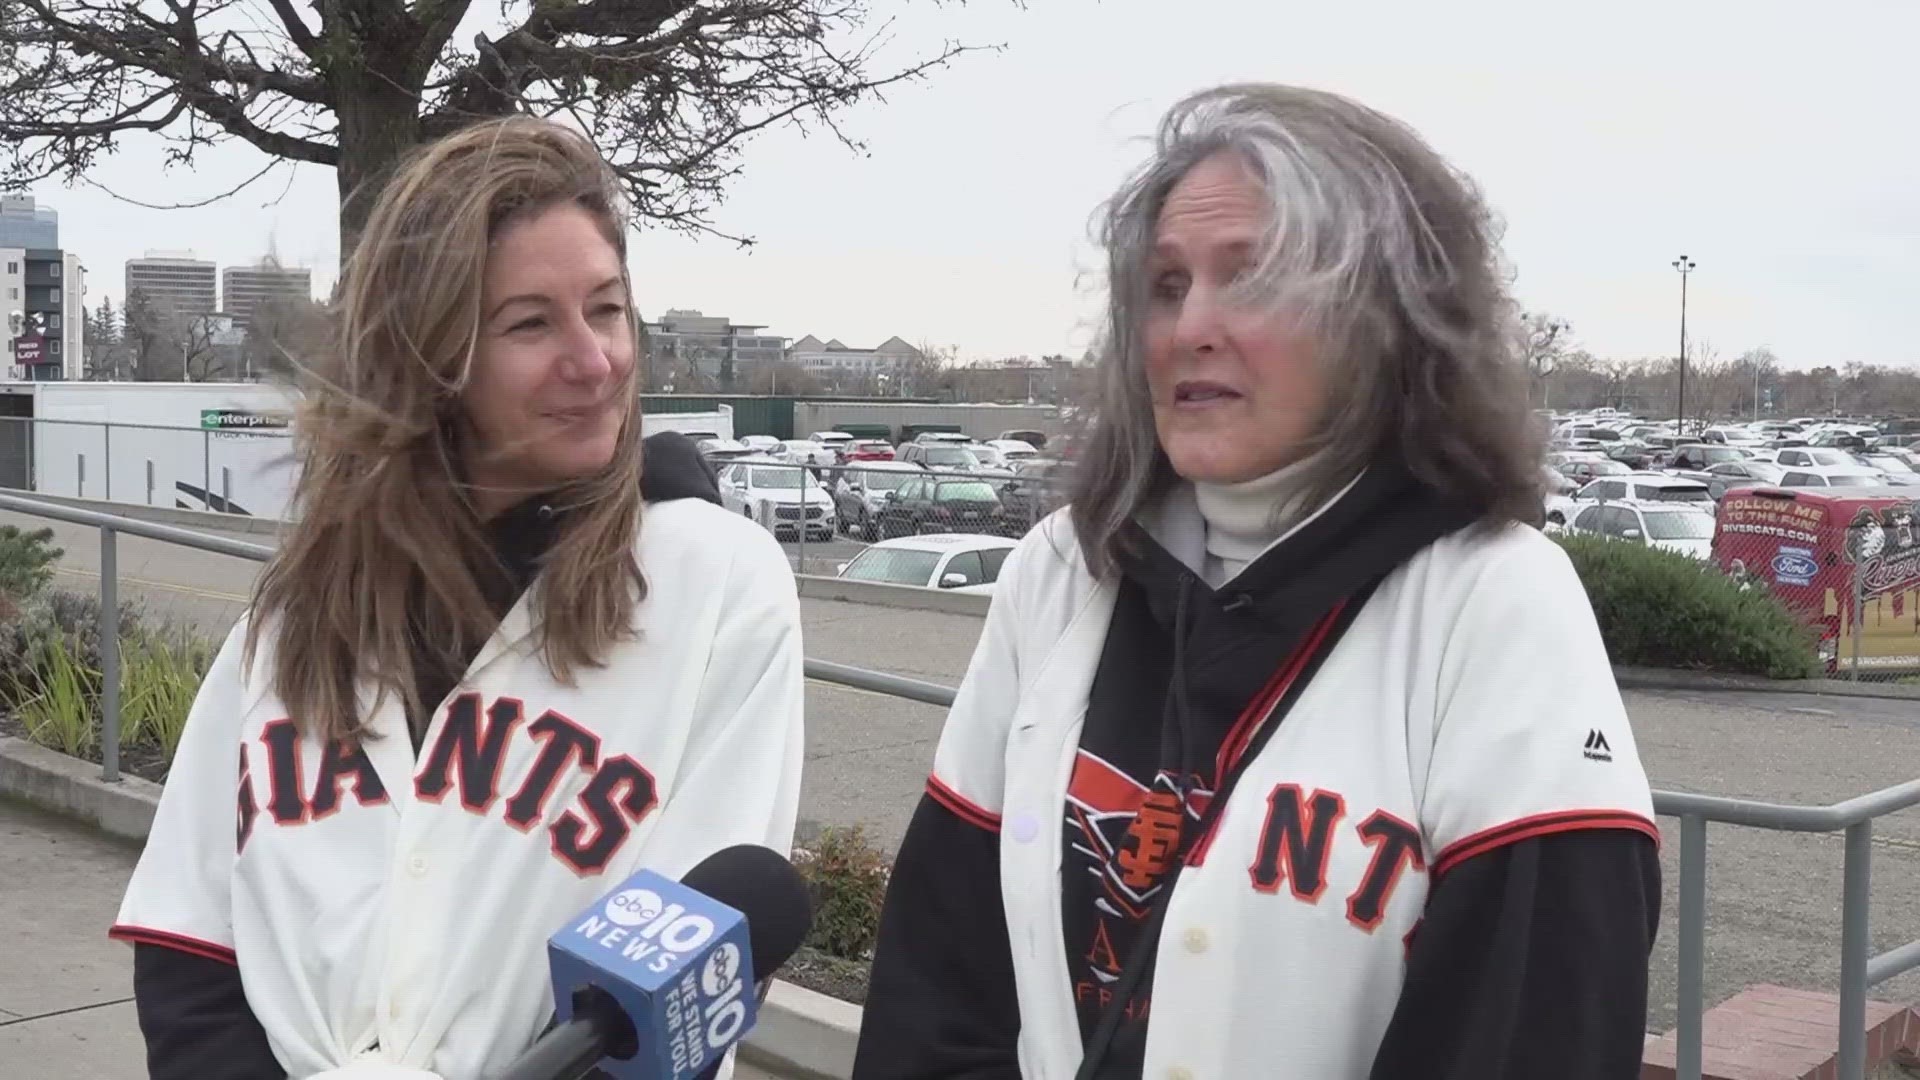 The San Francisco Giants Fanfest came to Sacramento's Sutter Health Park and we asked fans for their take on the A's baseball team coming to the capitol city.